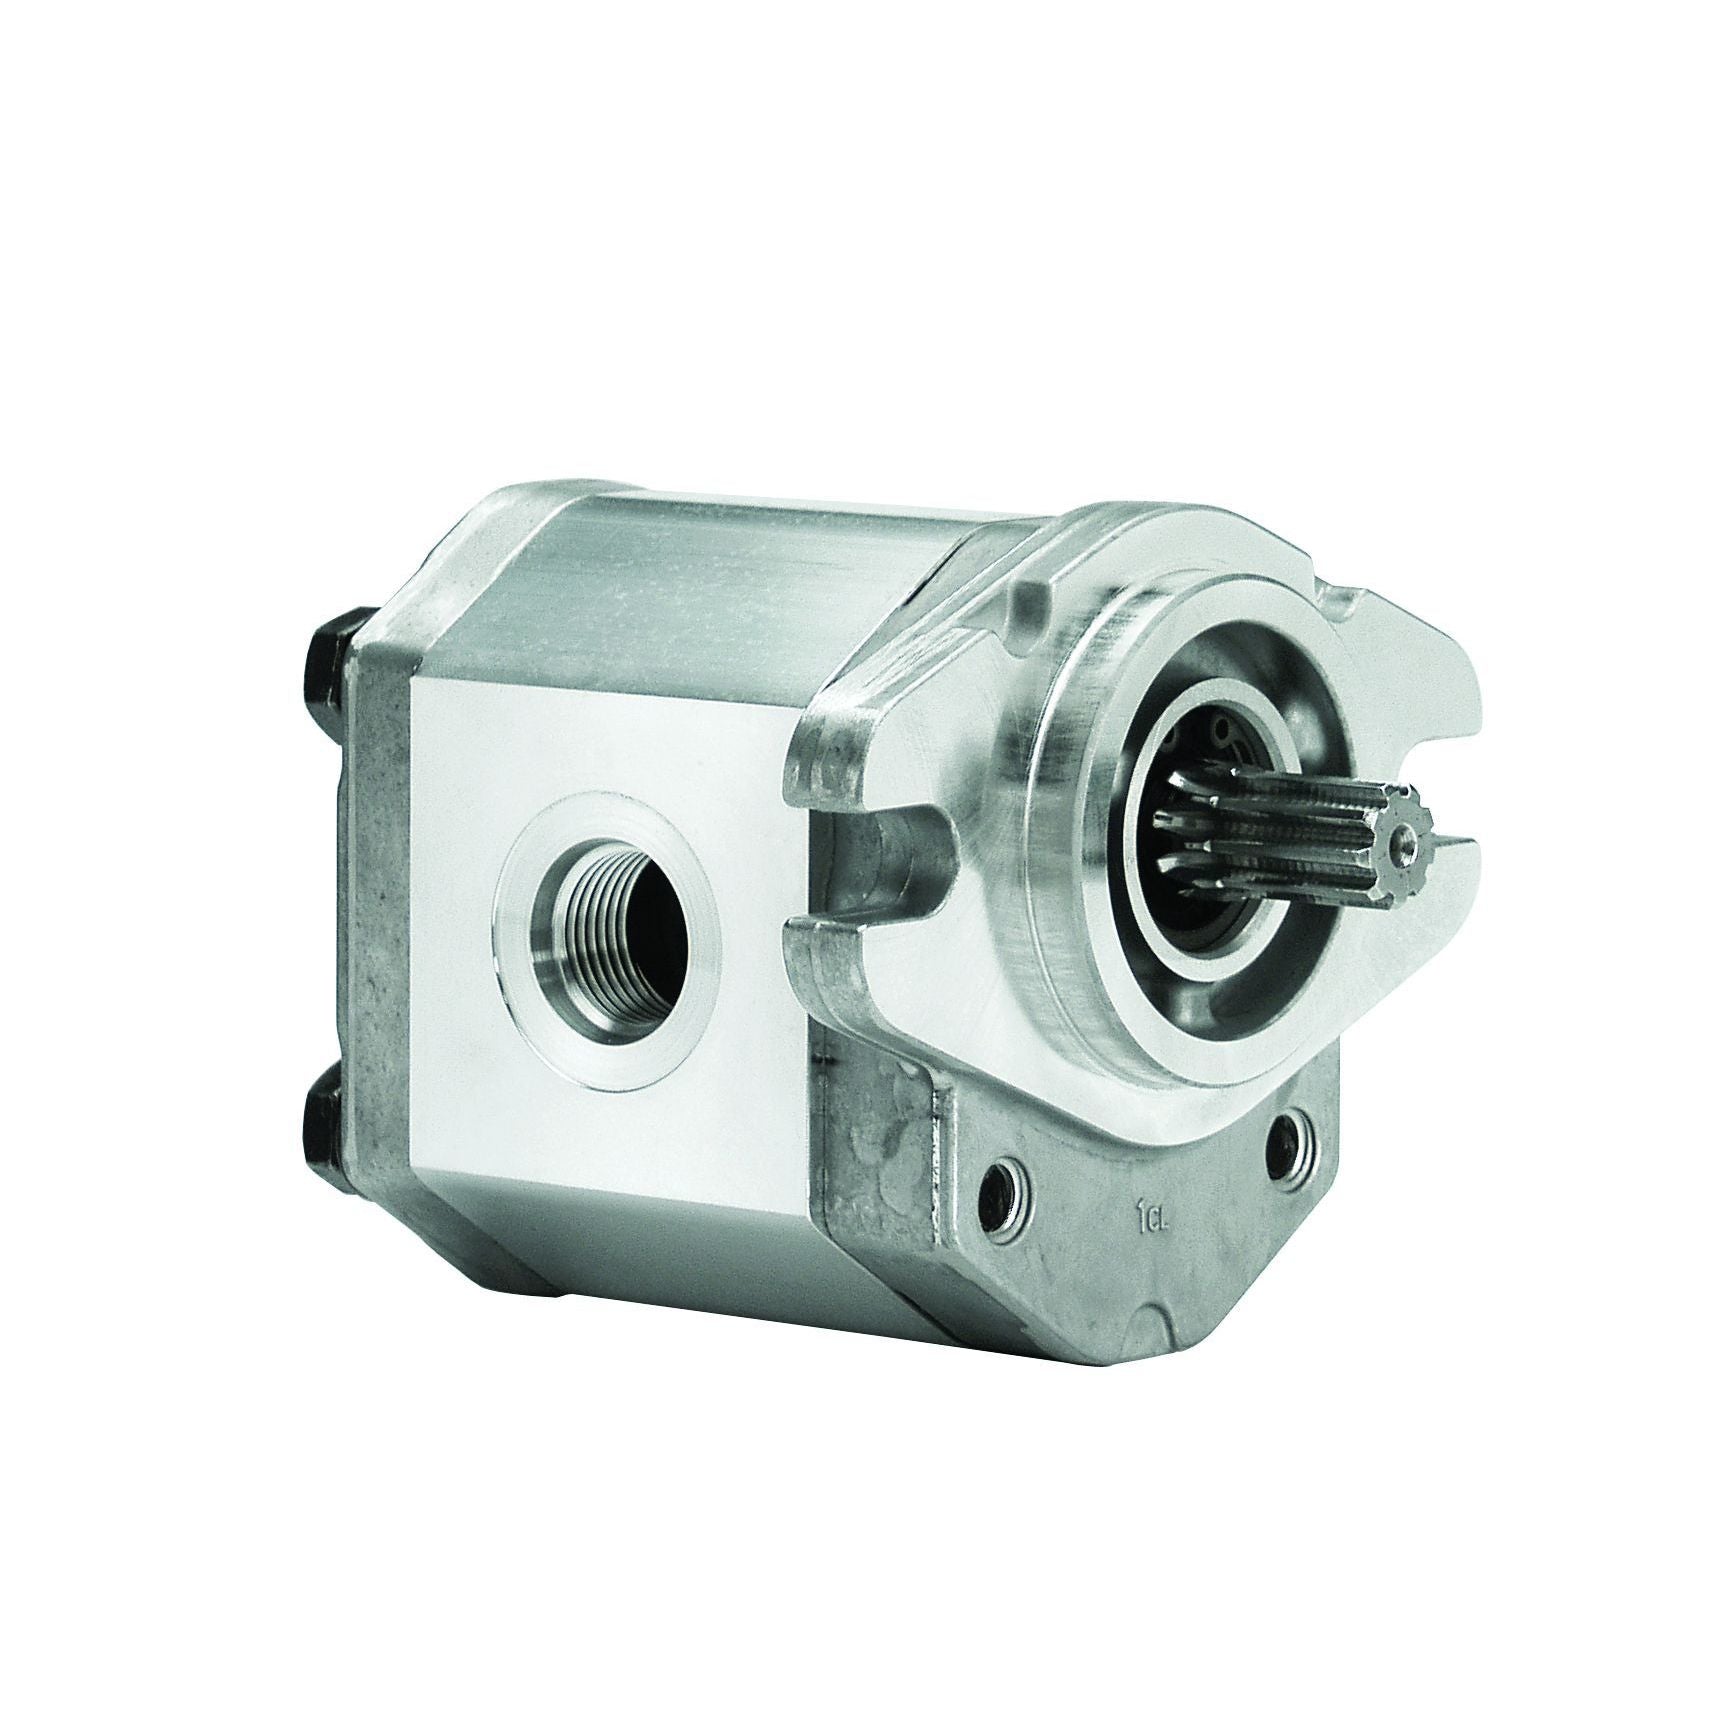 ALP3A-D-40-S1-FA : Marzocchi Gear Pump, CW, 26cc (1.586in3), 12.36 GPM, 3335psi, 3300 RPM, #16 SAE (1") In, #12 SAE (3/4") Out, Splined Shaft 13T 16/32DP, SAE B 2-Bolt Mount